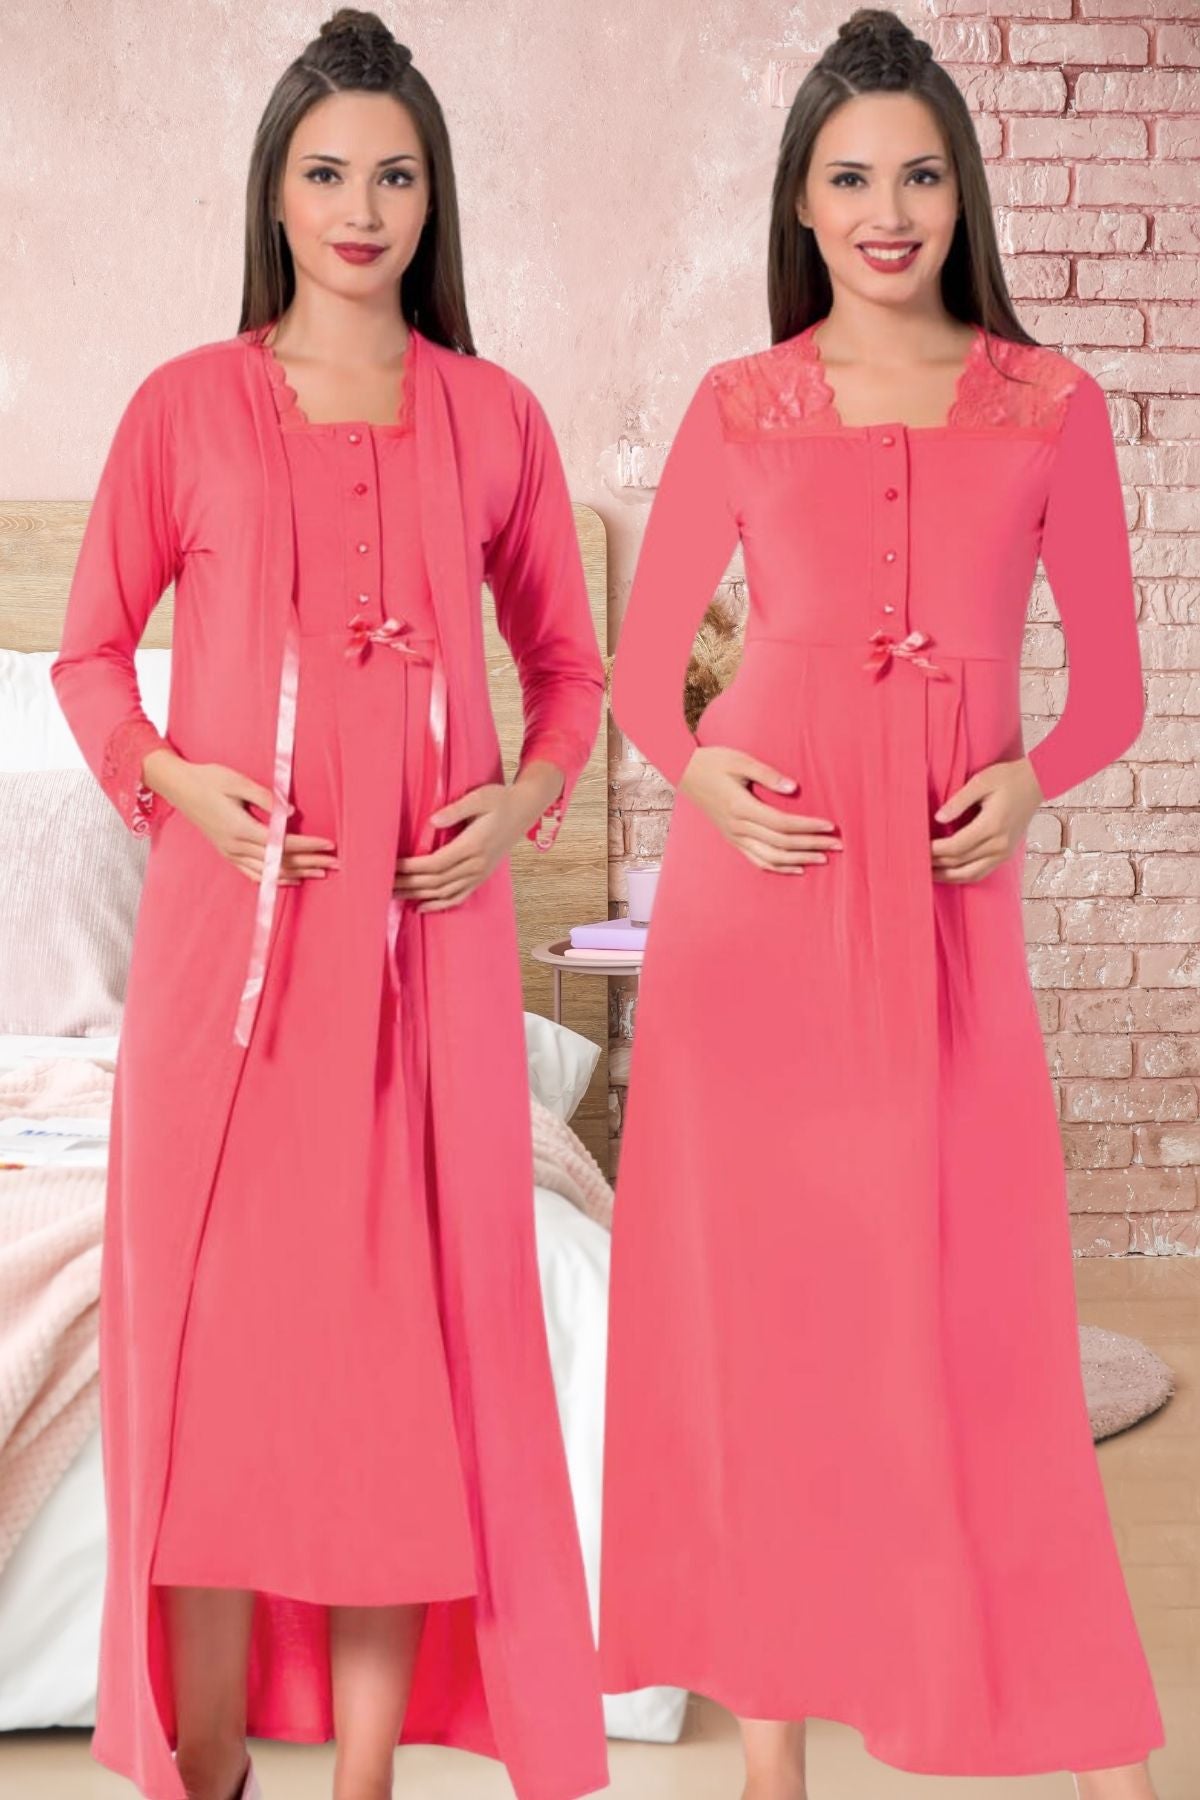 Shopymommy 26578 Lace Collar Maternity & Nursing Nightgown With Robe Pink